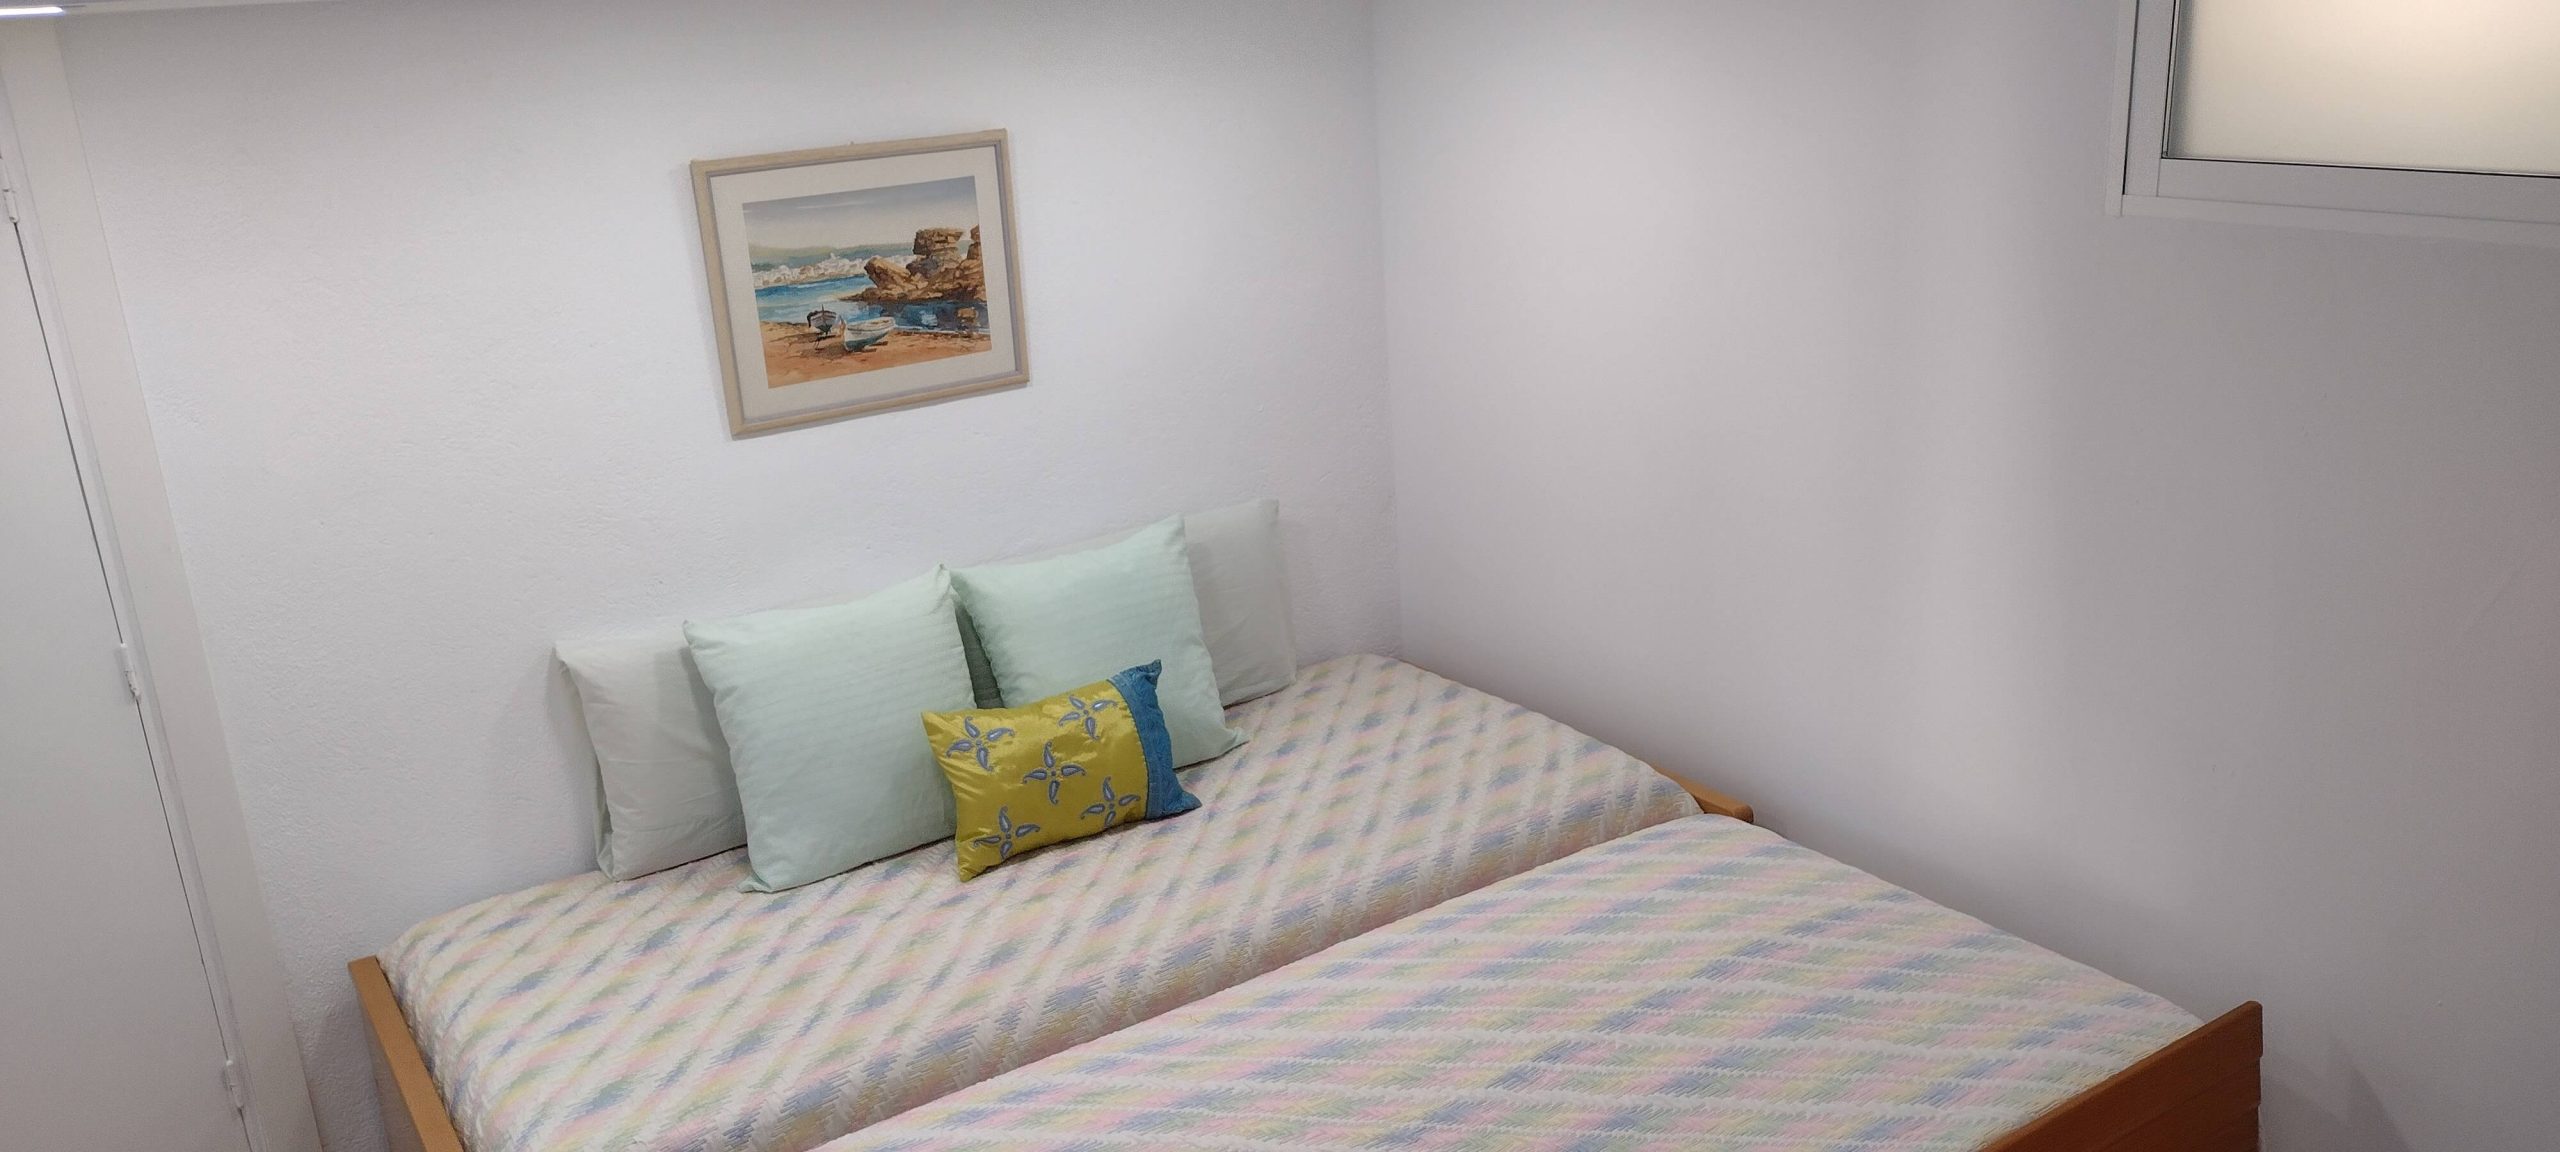 bedroom 2 in house for rent in can carreres